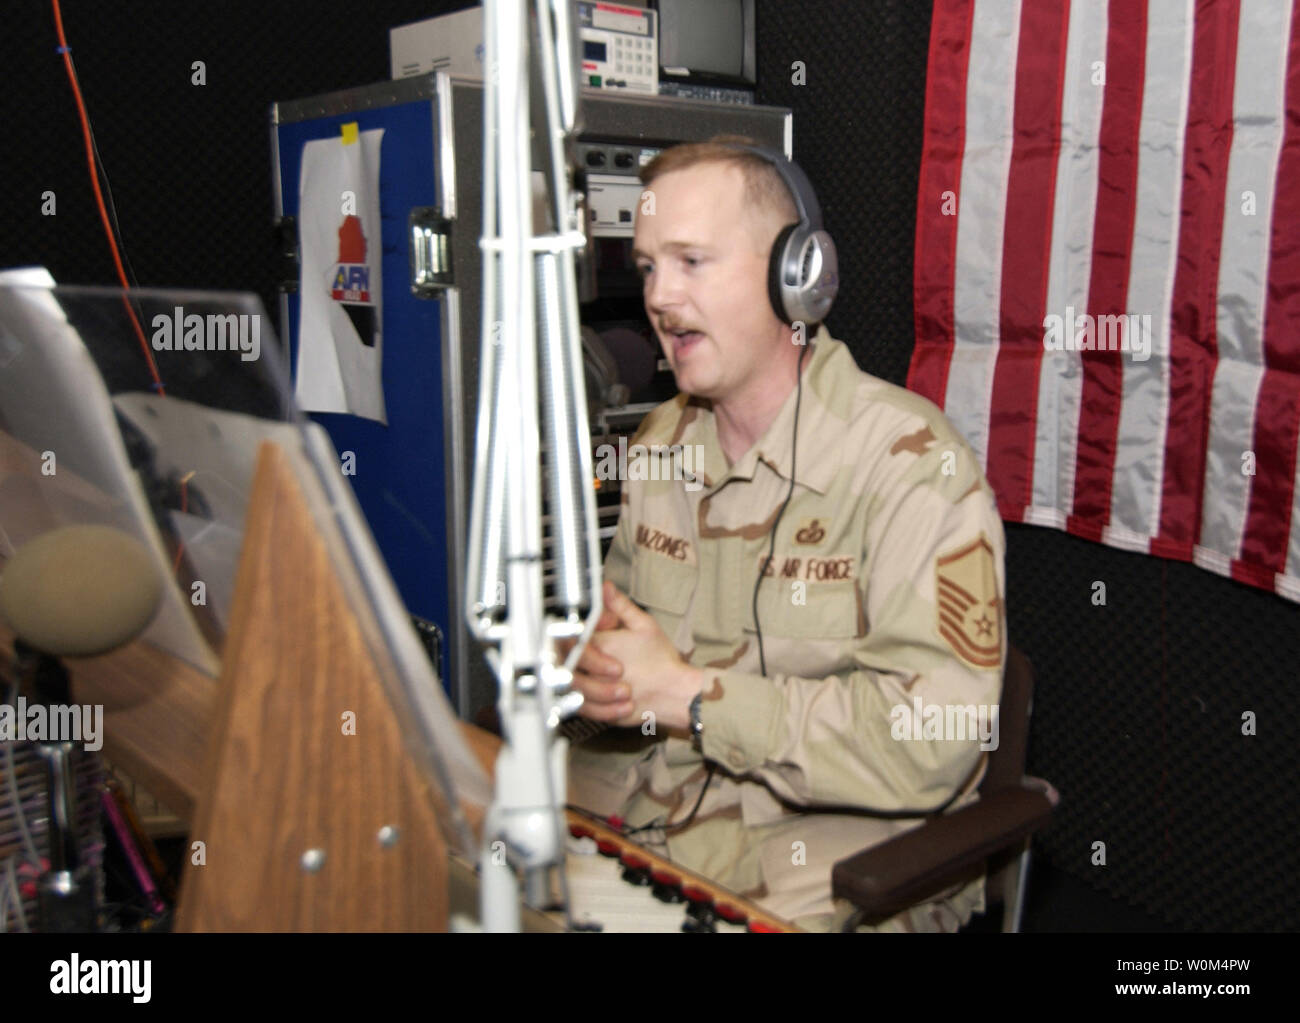 Master Sgt. Eric Branzones of Air Force News (AFN) went live on 107.7 FM from an undisclosed location in Iraq on Dec. 10, 2003.  (UPI Photo/Trish Bunting/Air Force) Stock Photo